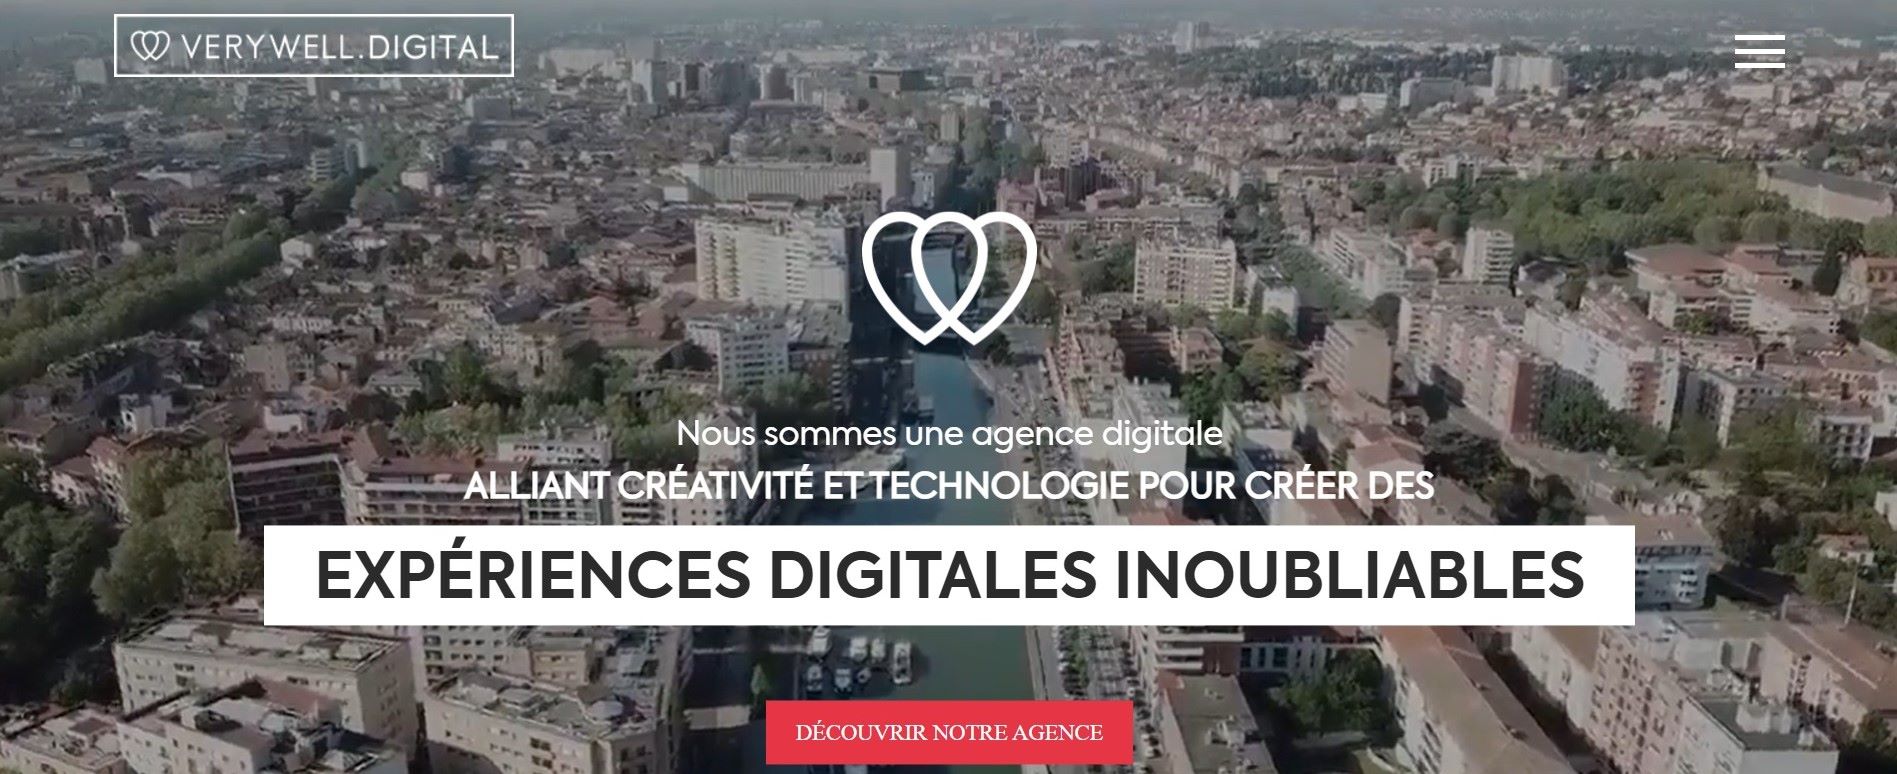  Verywell Digital - Agence Web à Toulouse